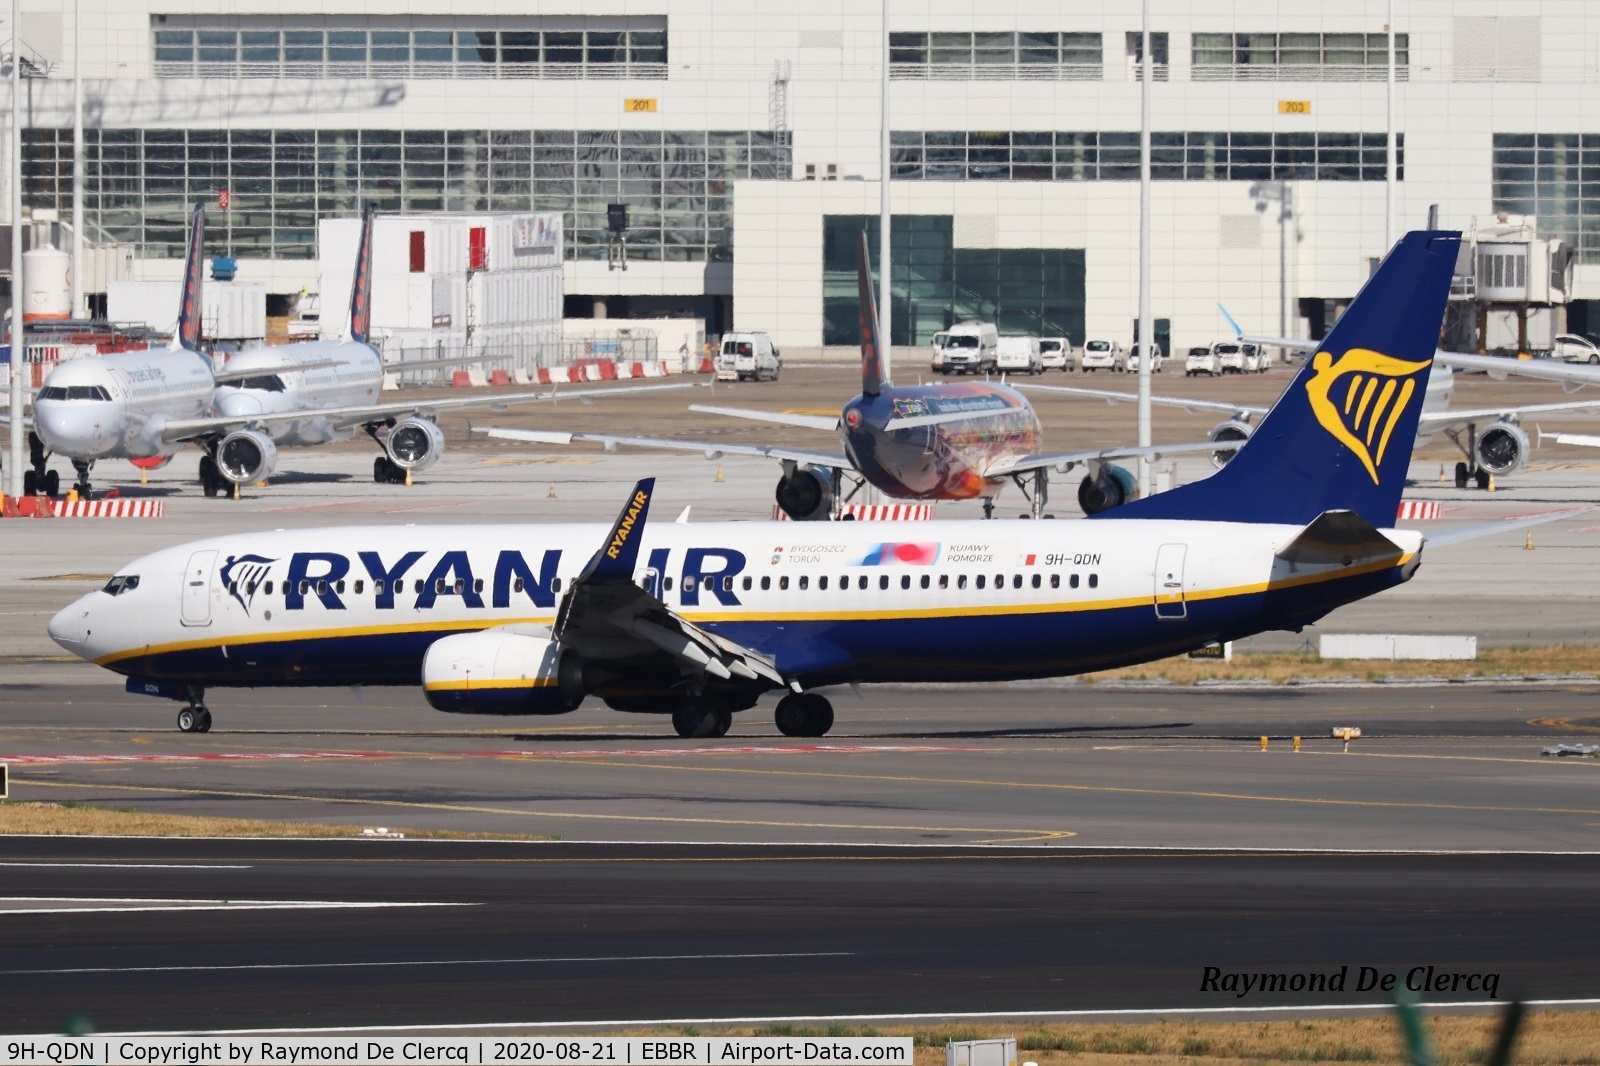 9H-QDN, 2016 Boeing 737-8AS C/N 44763, Still in Ryanair livery but operated by Malta Air.